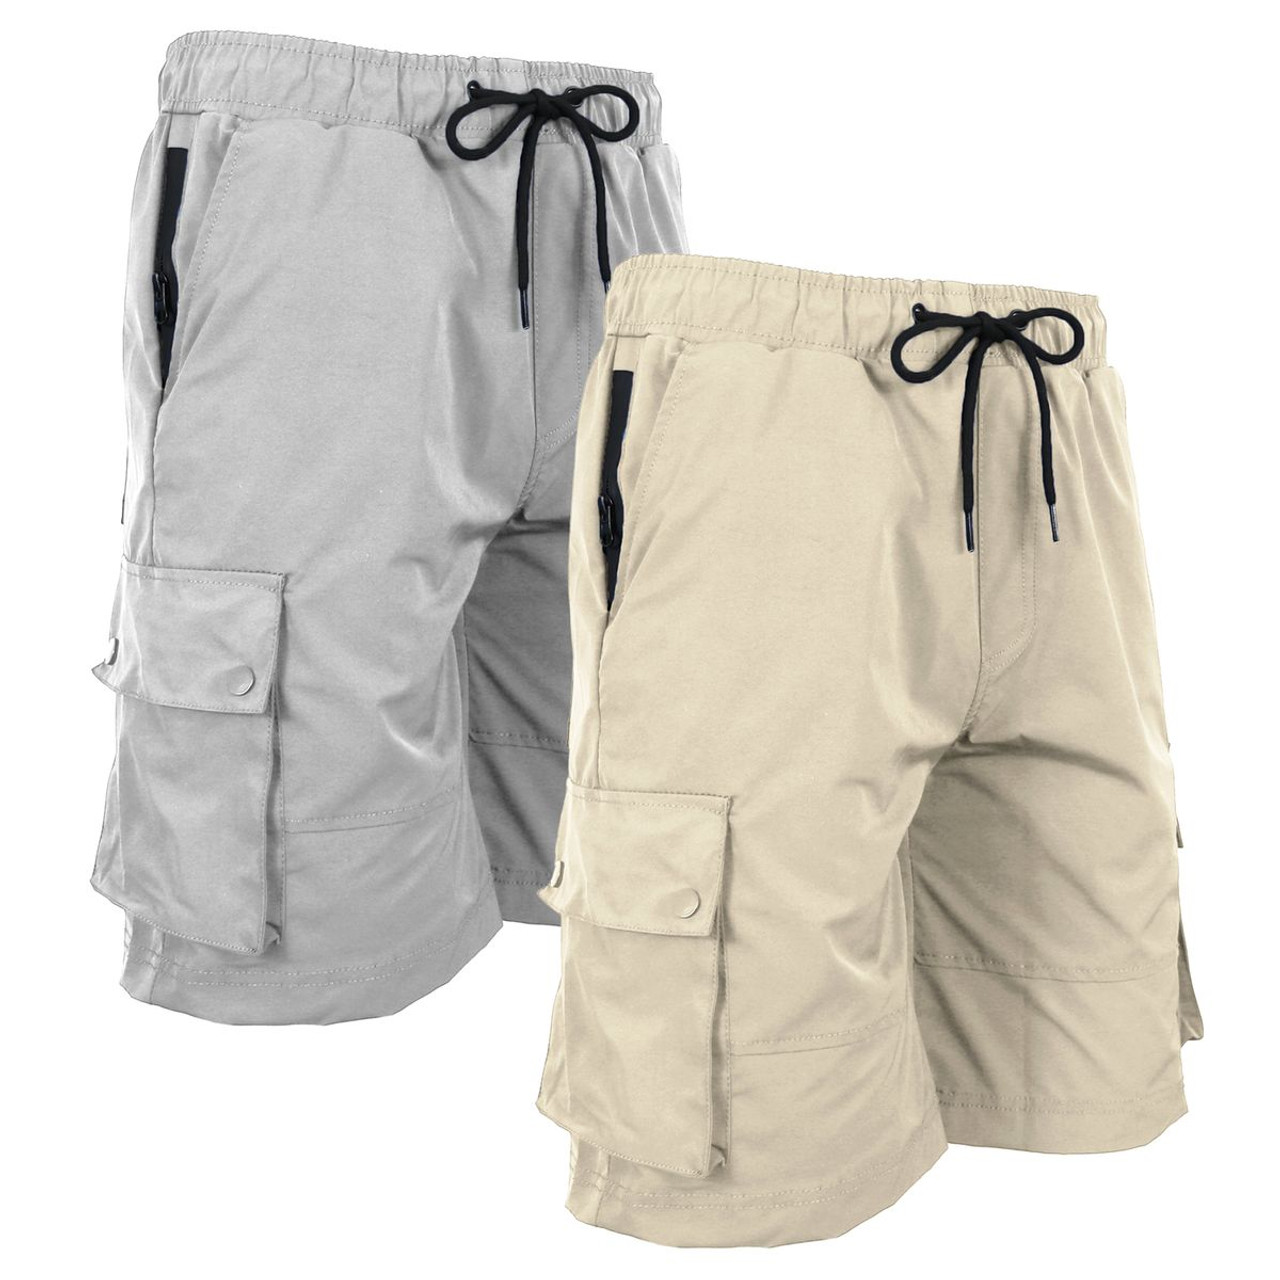 Men's Moisture-Wicking Quick-Dry Performance Cargo Shorts product image